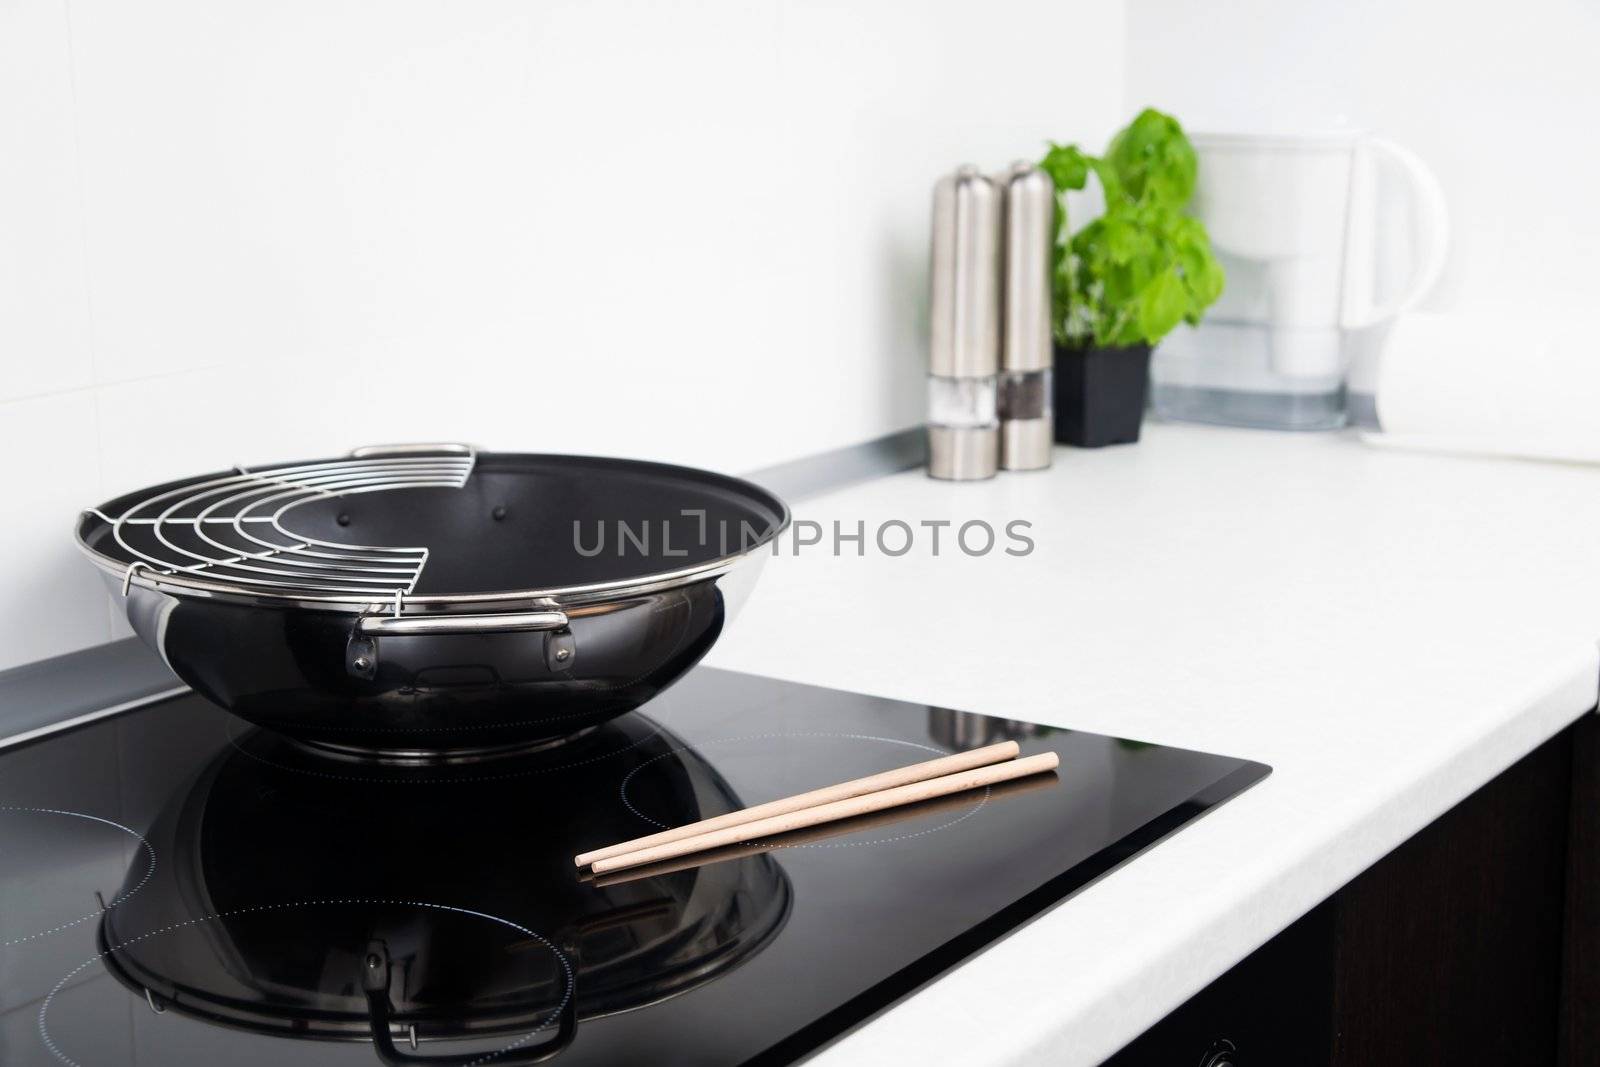 Frying pan and sticks in modern kitchen with induction stove